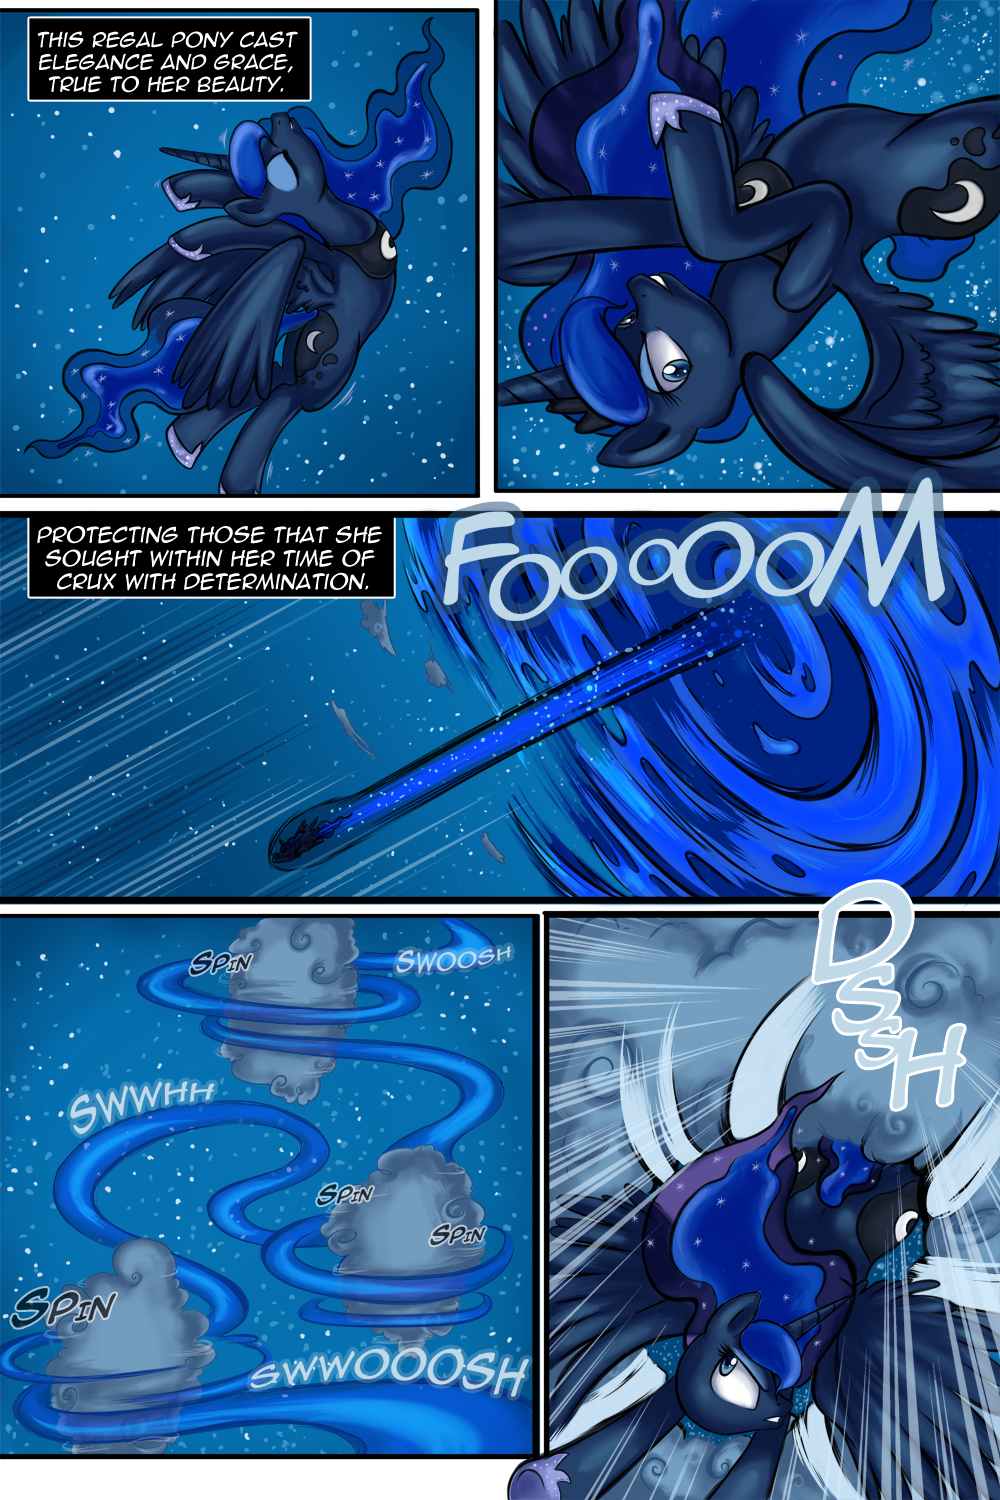 mlp_the_fallen_moon_chapter_1_page_2_by_guardian_core-d5t5rvh.png